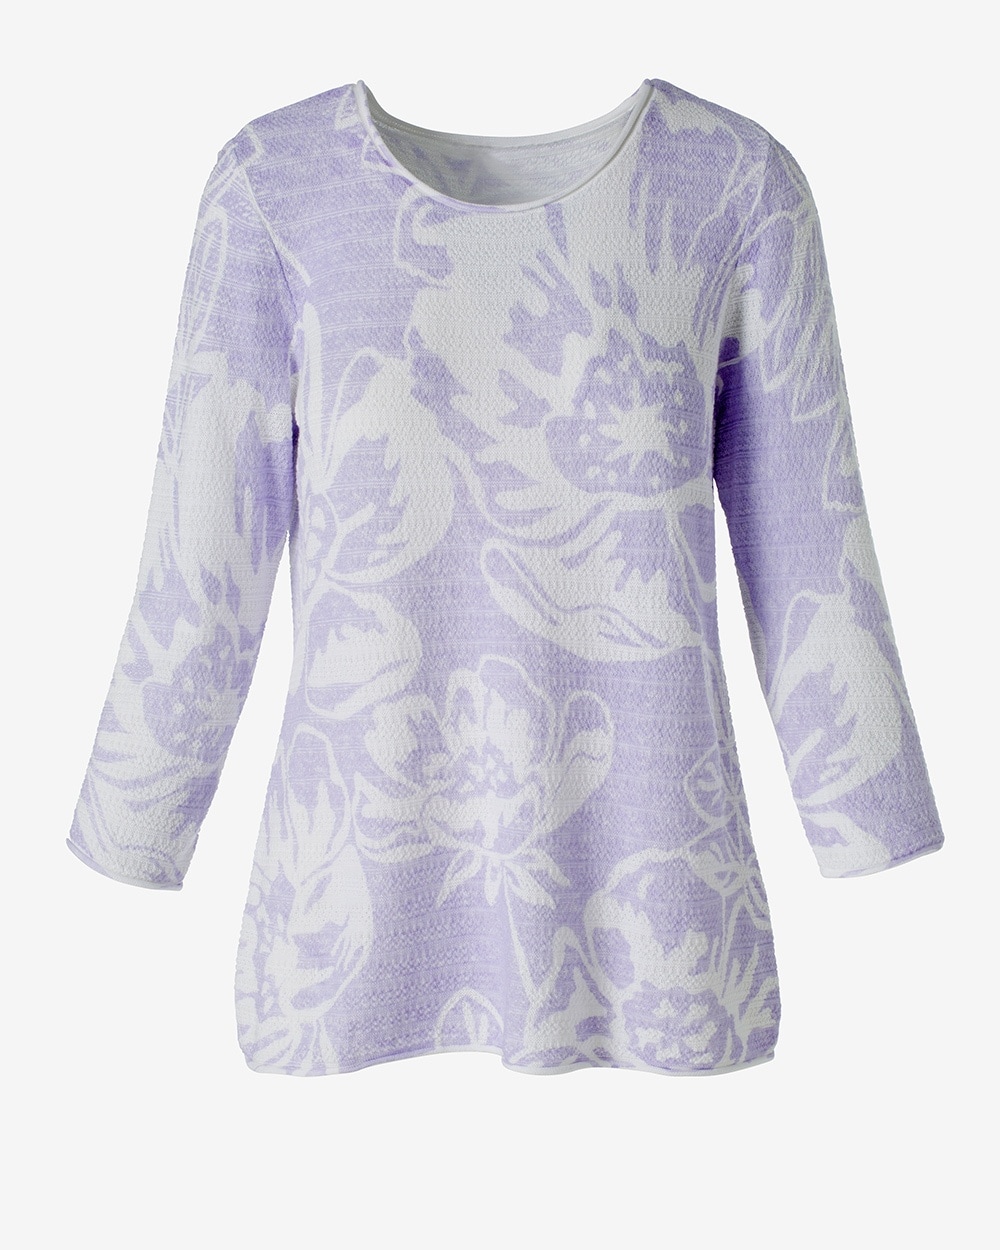 Inside Out Floral Pullover